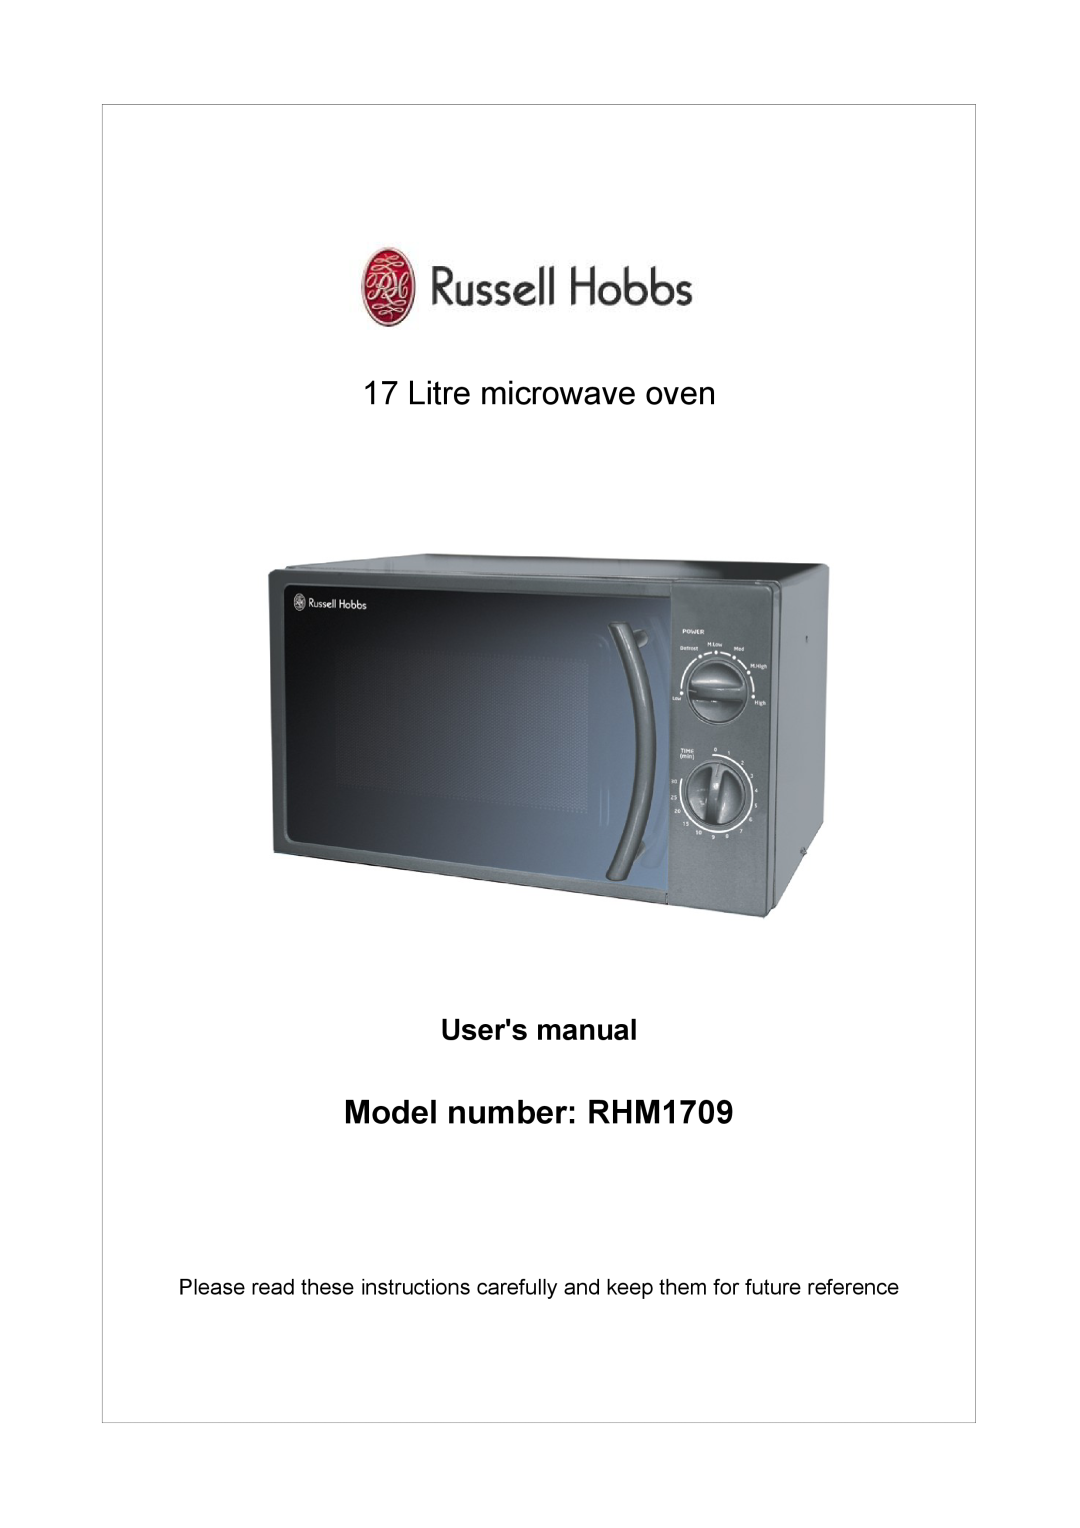 Russell Hobbs user manual Litre microwave oven, Model number RHM1709 